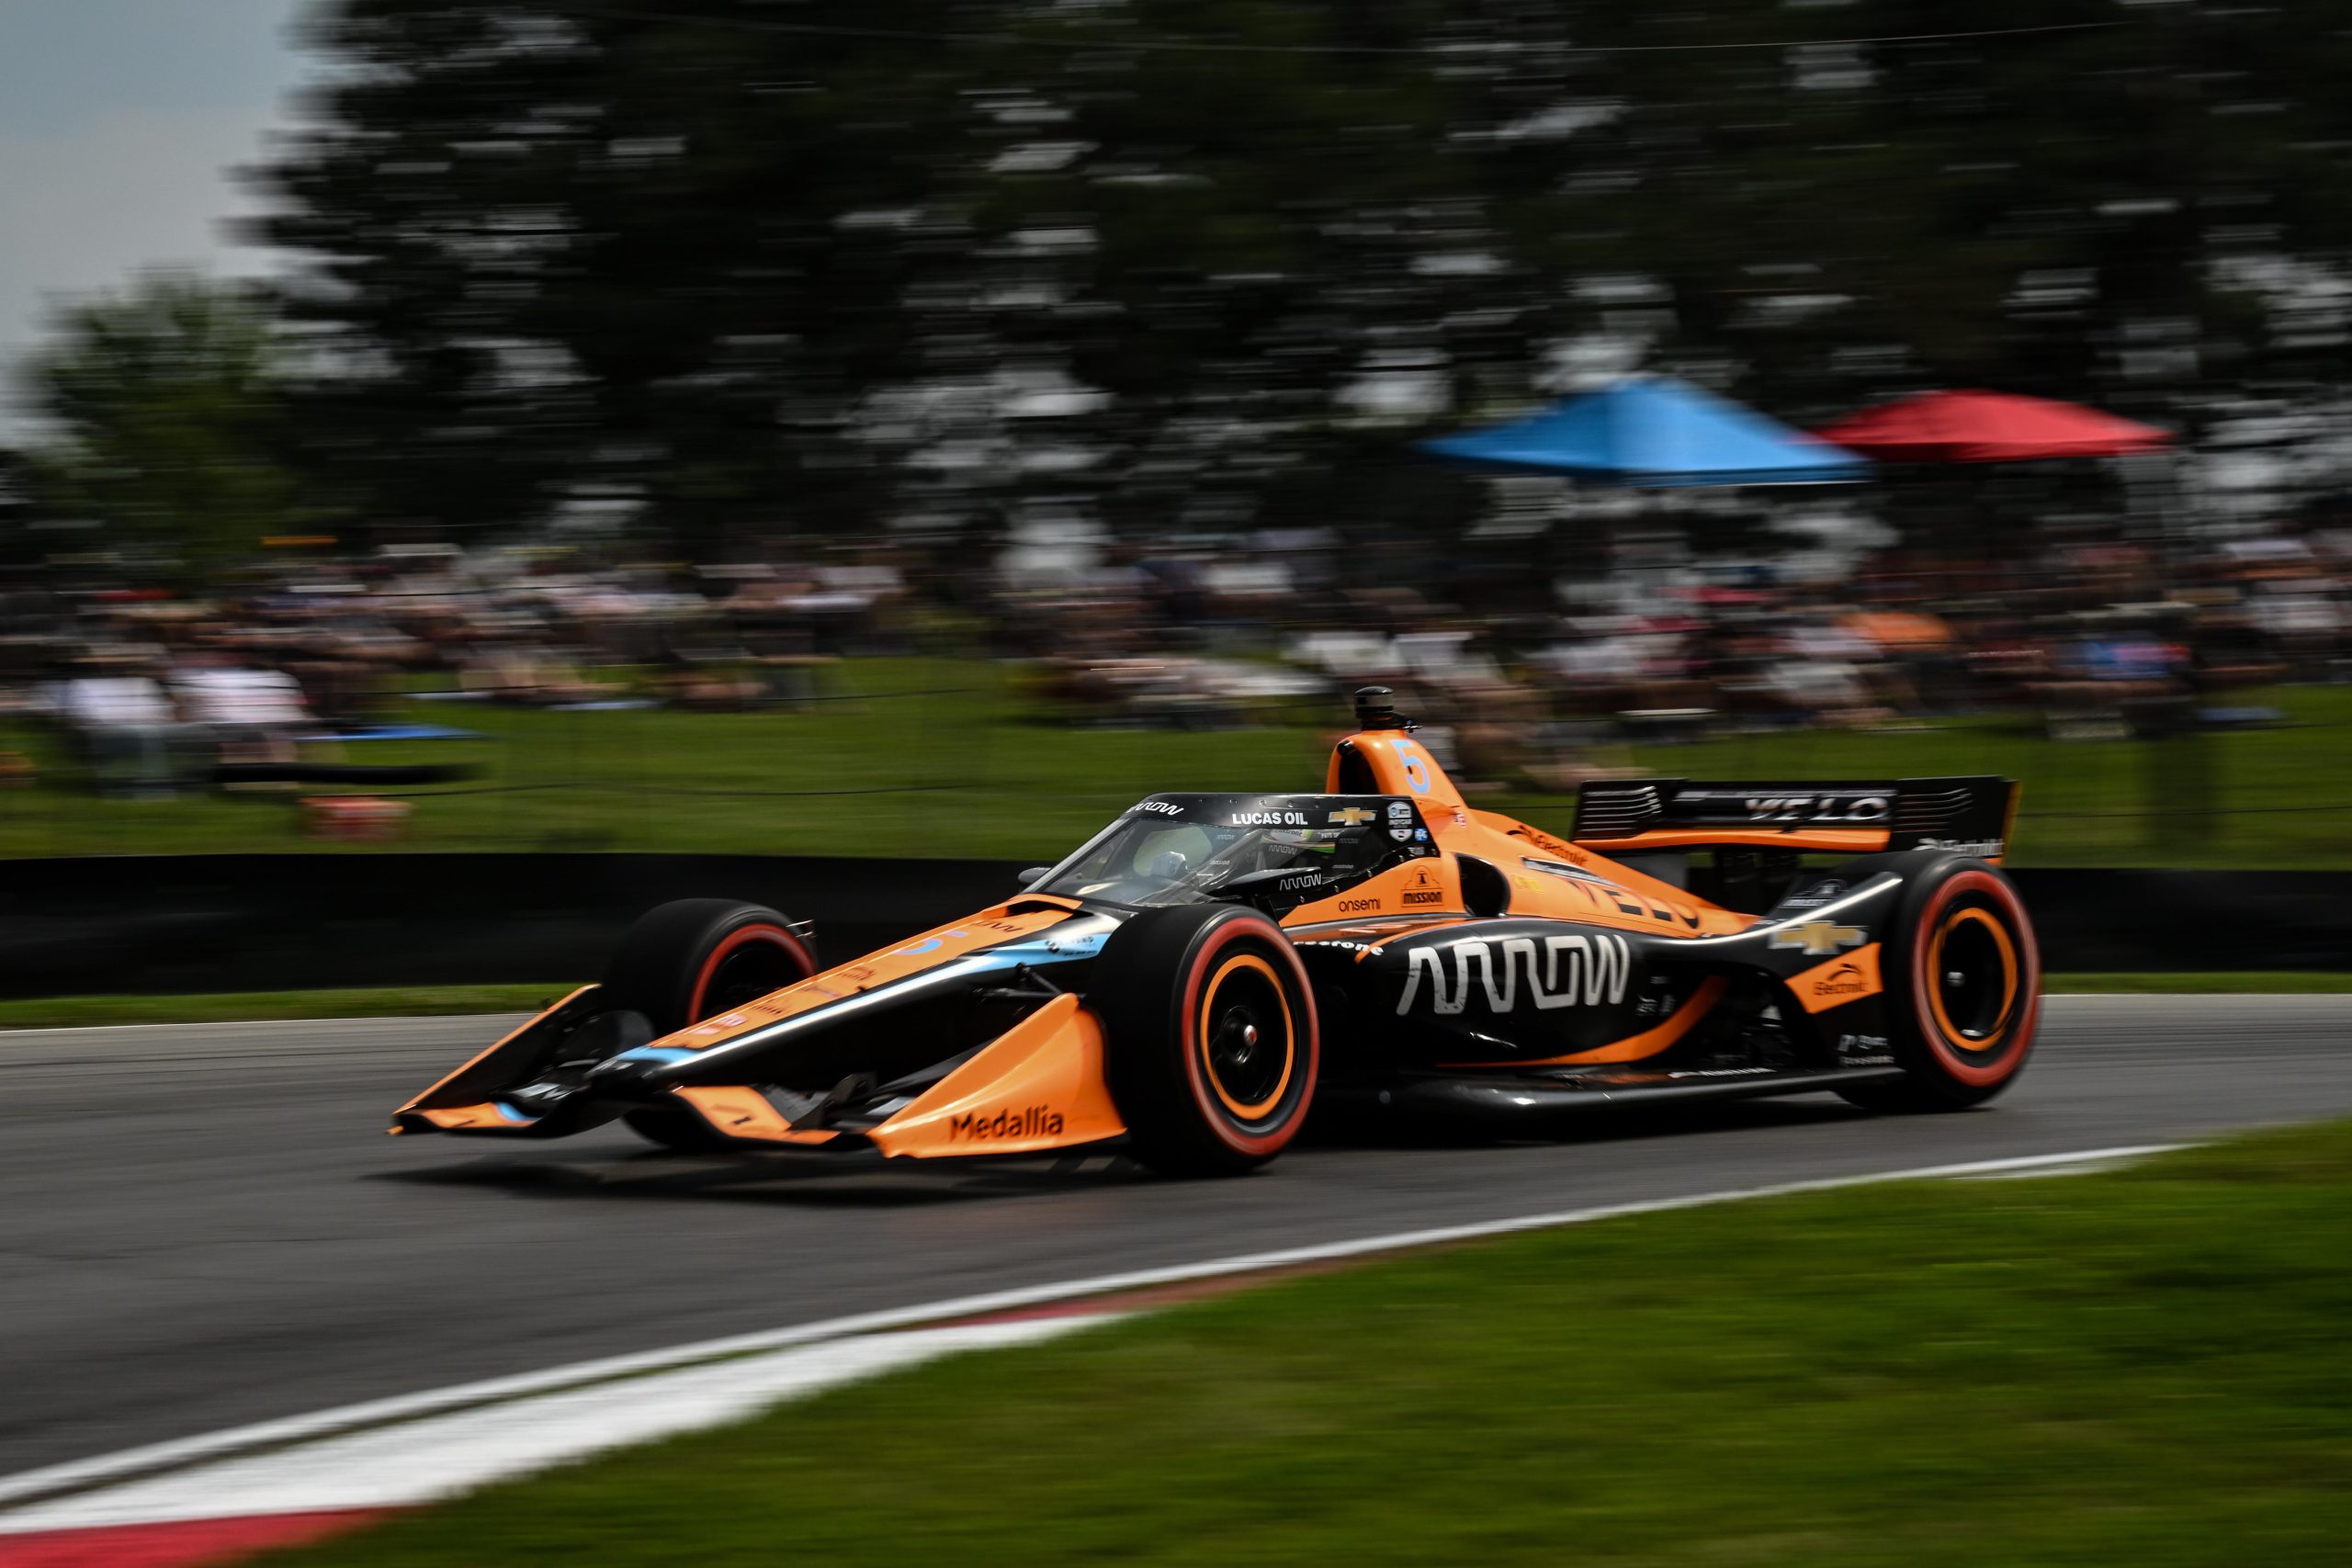 Pato O'Ward during Practice 1 for the Honda Indy 200 at Mid-Ohio Sports Car Course. (James Black/Penske Entertainment)